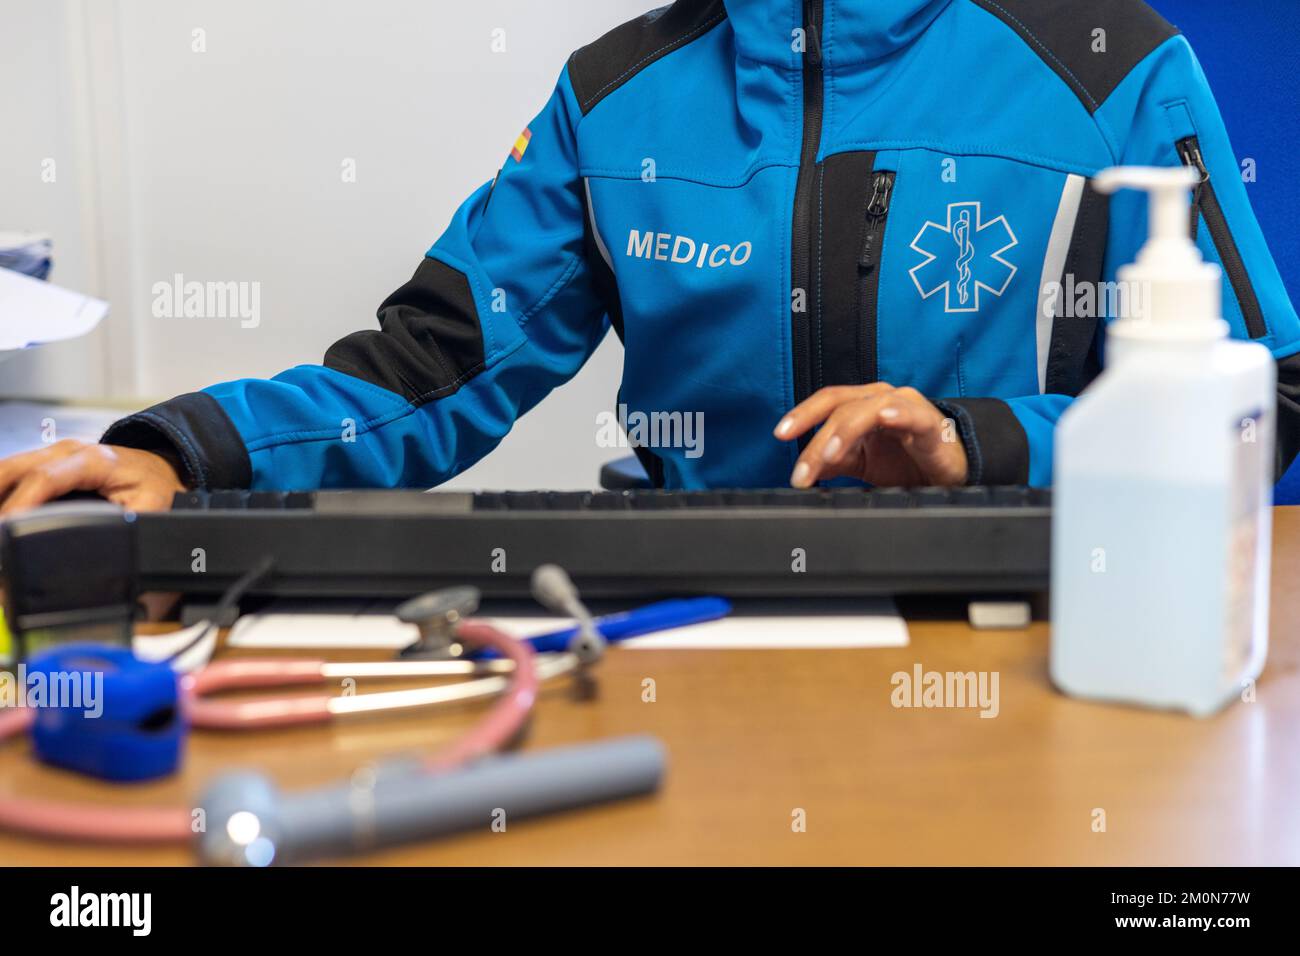 Doctor's working on laptop computer, writing prescription clipboard with record information paper folders on desk in hospital or clinic. Stock Photo